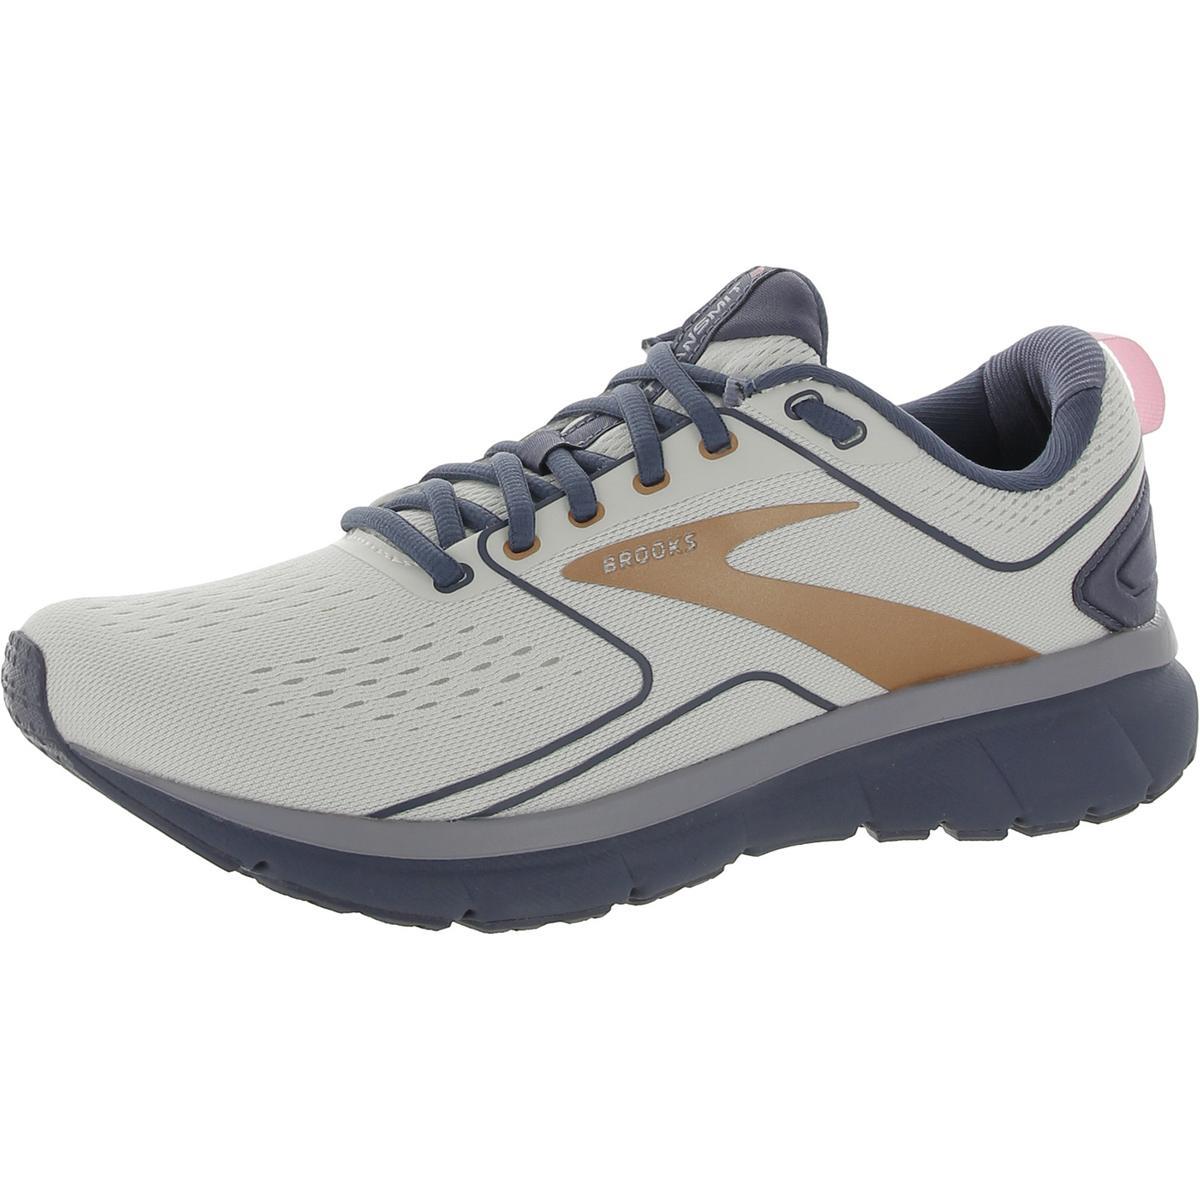 Brooks Womens Transmit 3 Fitness Workout Running Shoes Sneakers Bhfo 5885 Spa Blue/Neo Pink/Copper